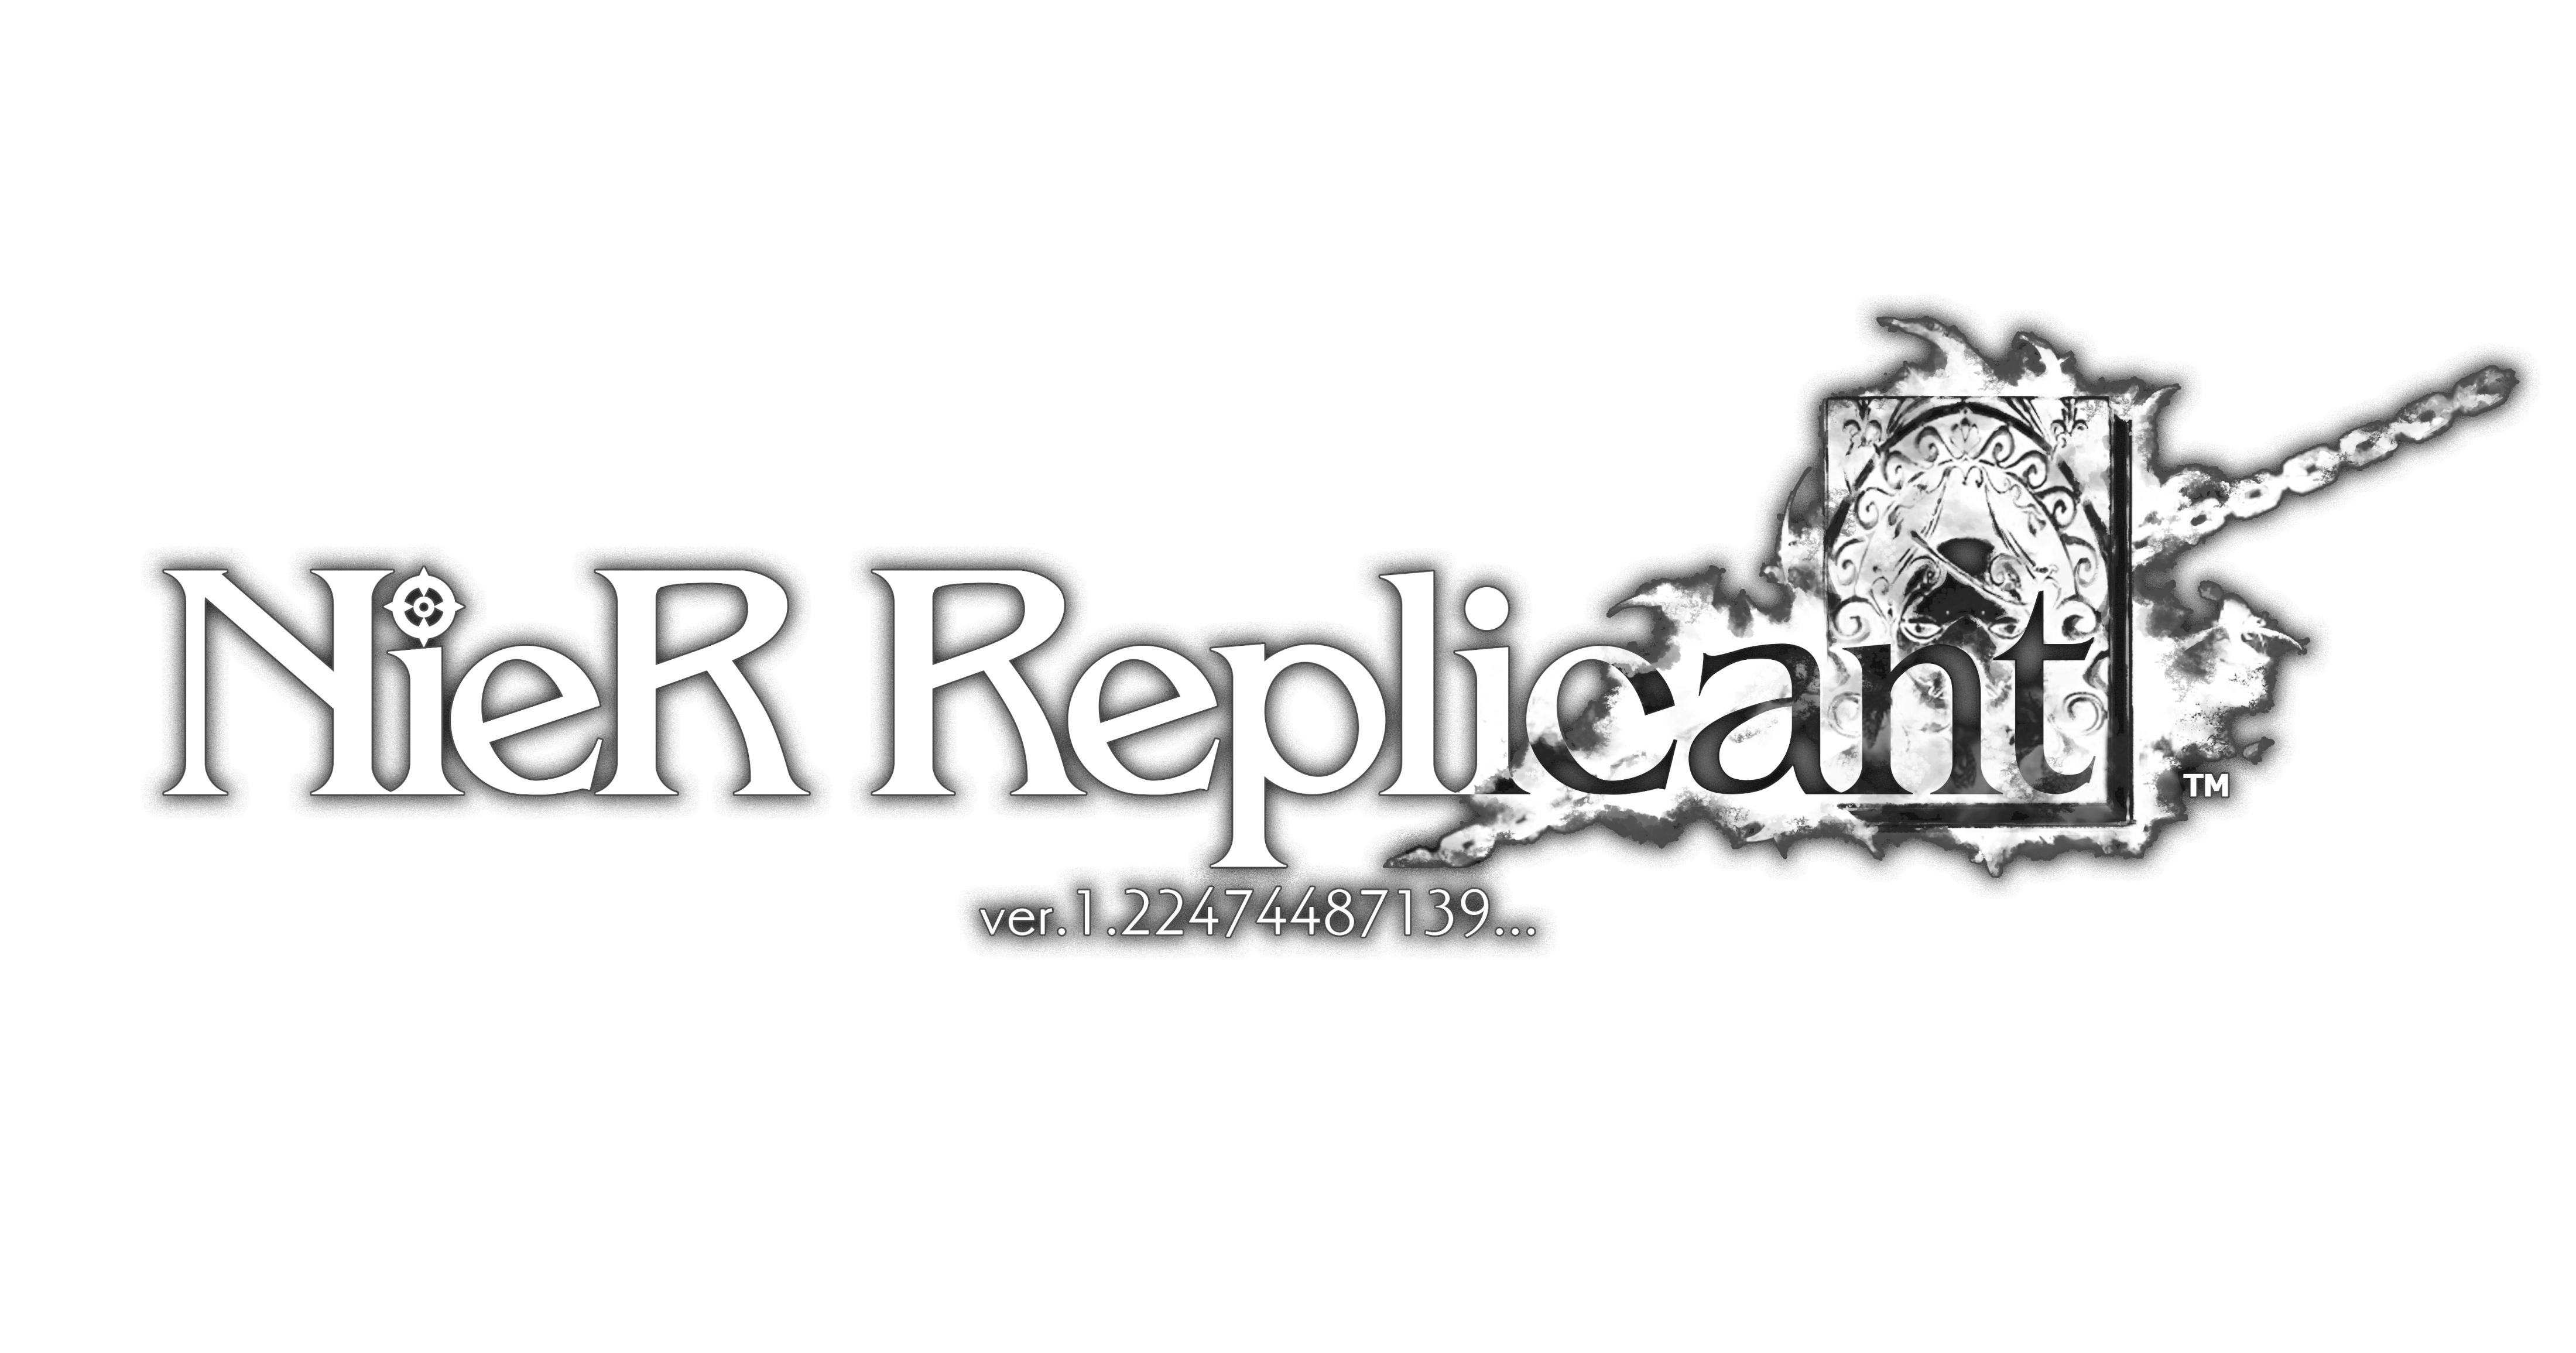 NieR Replicant ver.1.22474487139. is an updated version of NieR Replicant.....